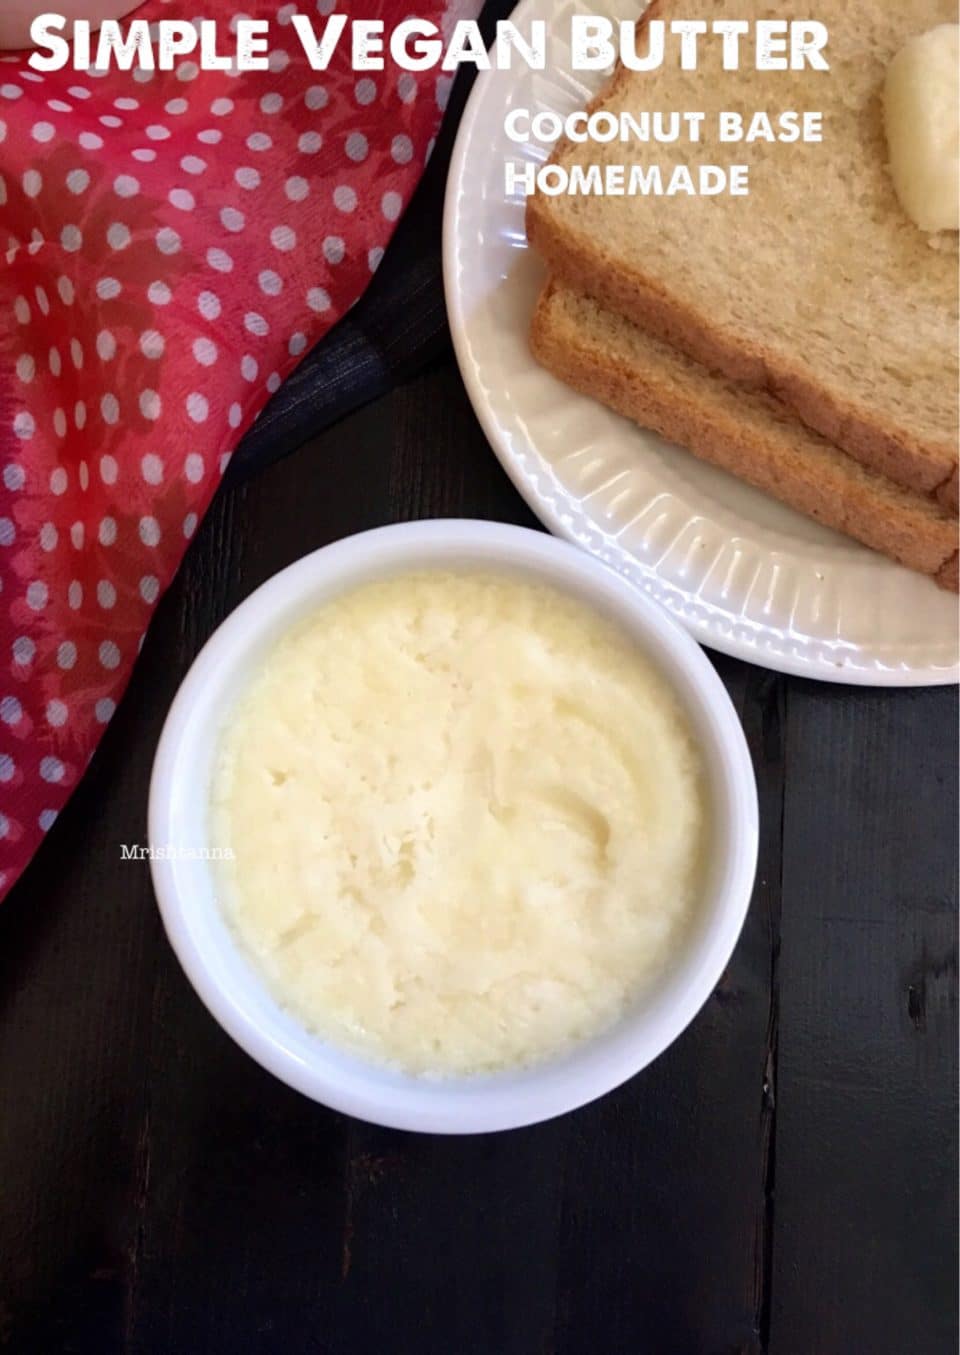 A bowl of food on a plate, with Vegan Butter